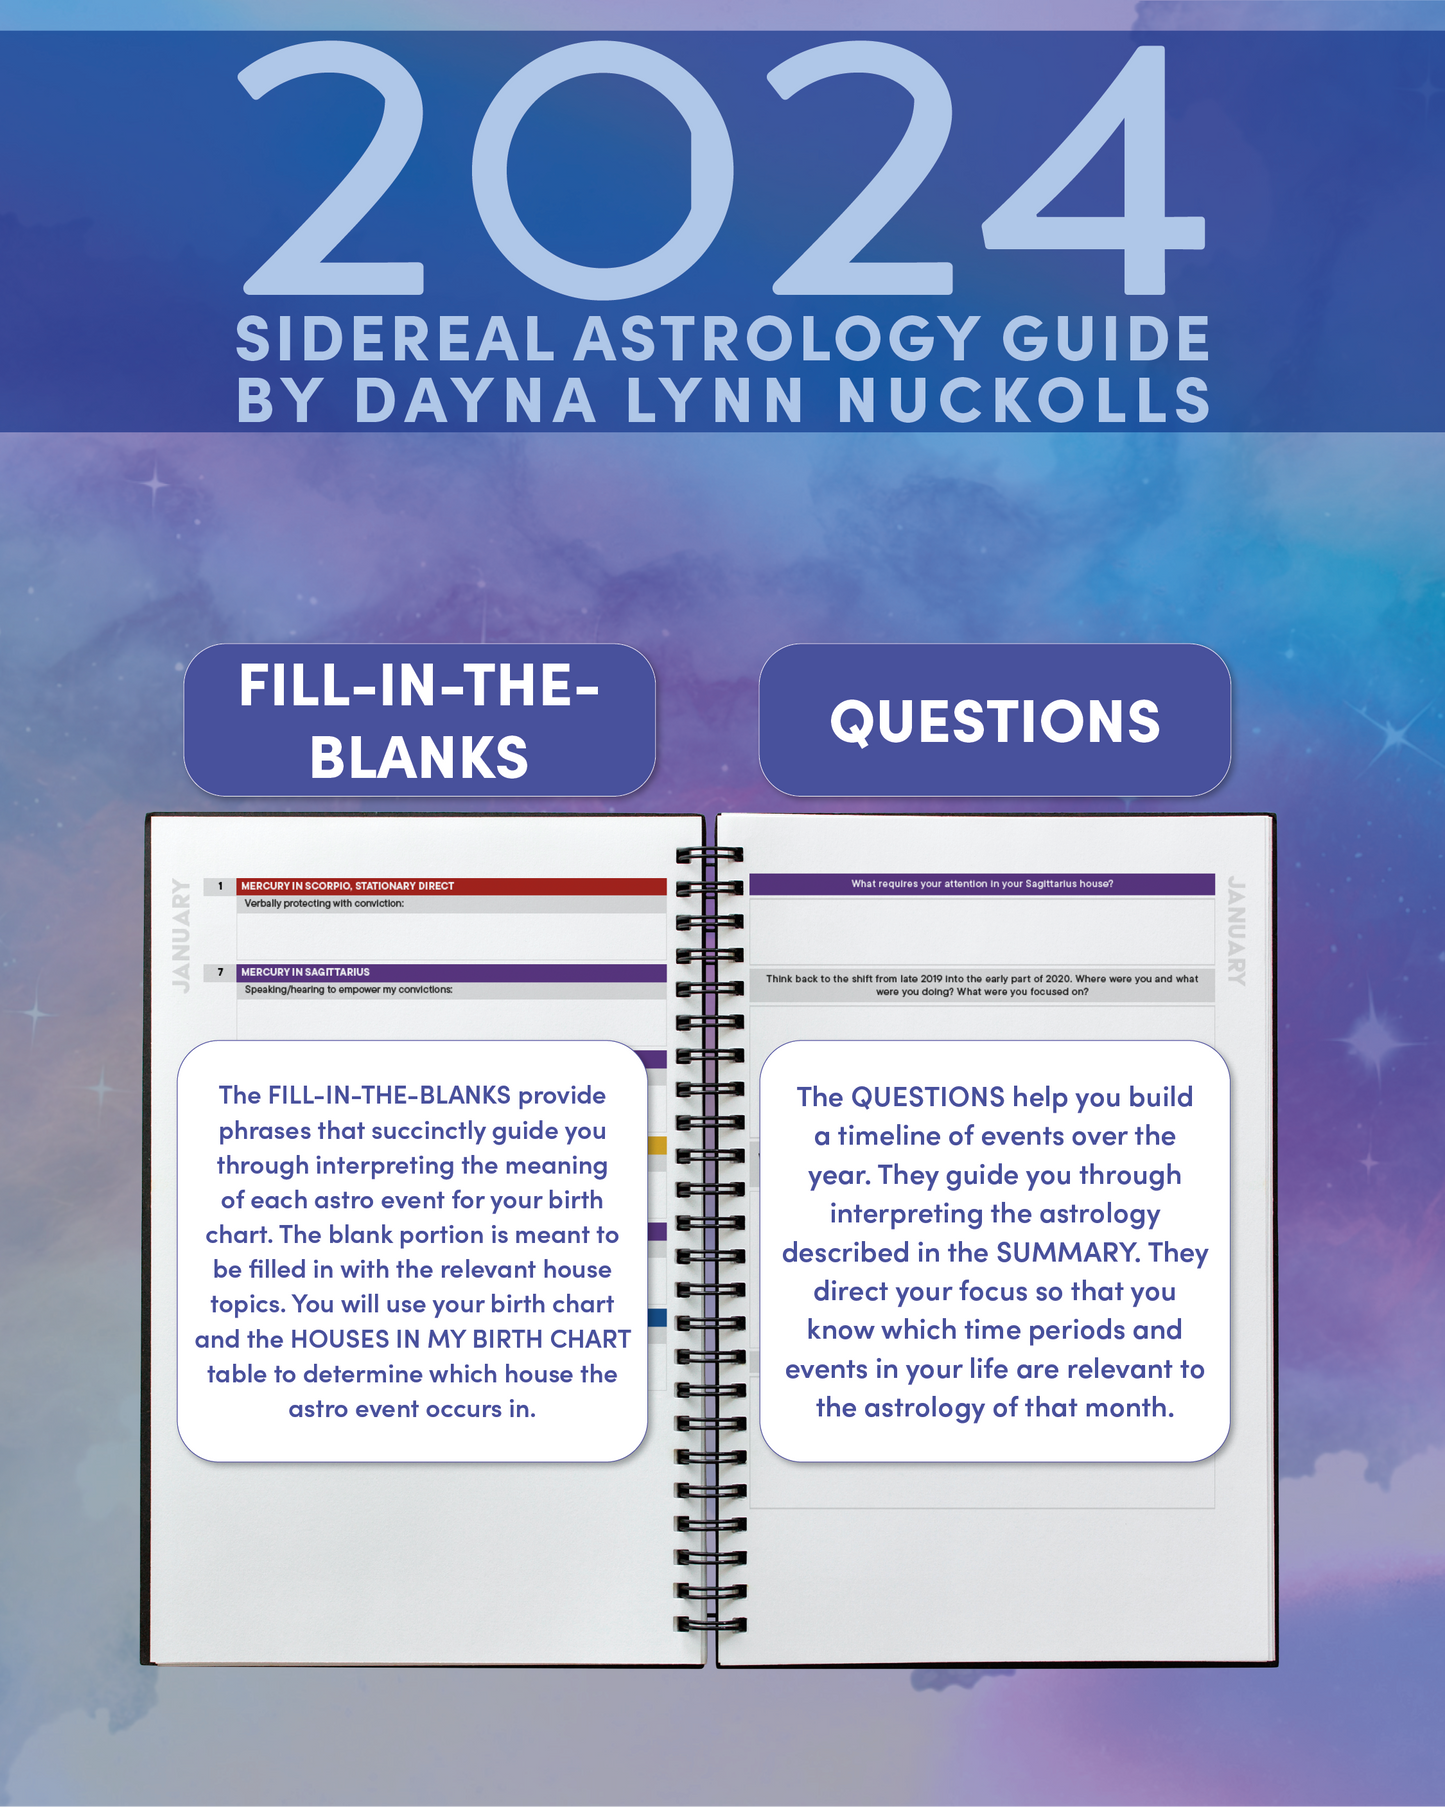 The 2024 Sidereal Astrology Guide is an astrology calendar, sidereal astrology calendar, and sidereal astrology journal. Fill-in-the-blanks for each transit help you create your 2024 horoscope. Questions for each month in the 2024 sidereal astrology calendar is your journal for the sidereal astrology of 2024.